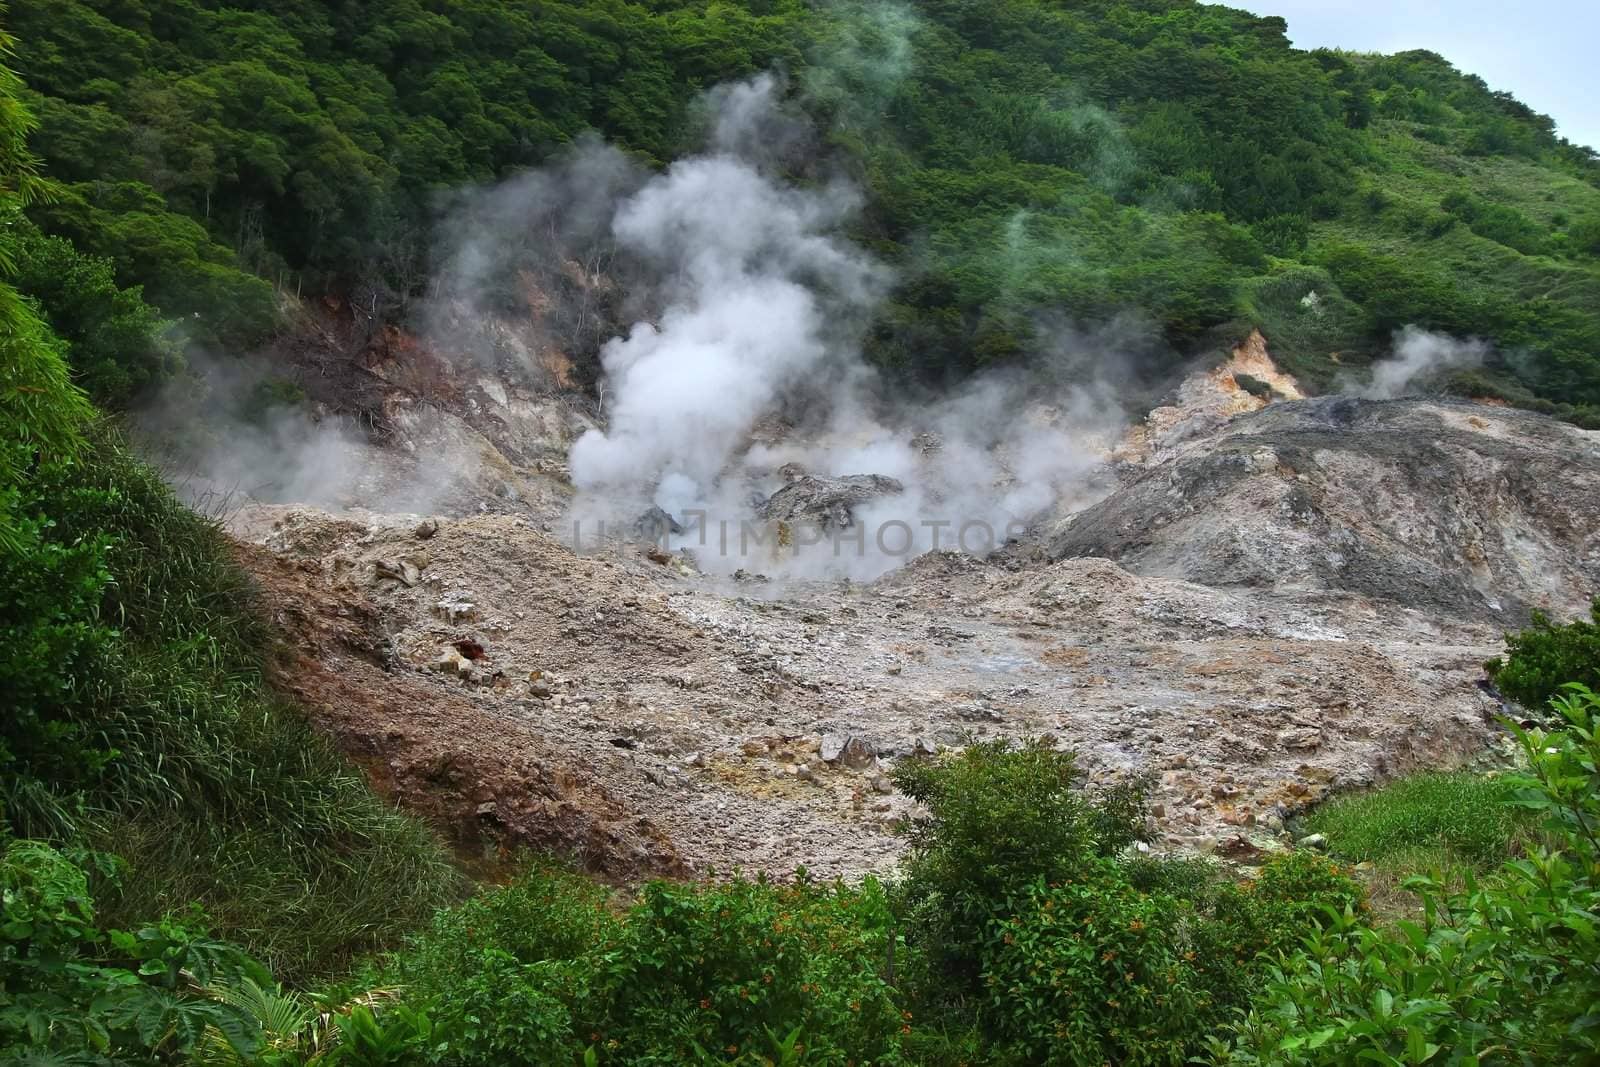 View of the Sulphur Springs Drive-in Volcano near Soufriere, Saint Lucia.